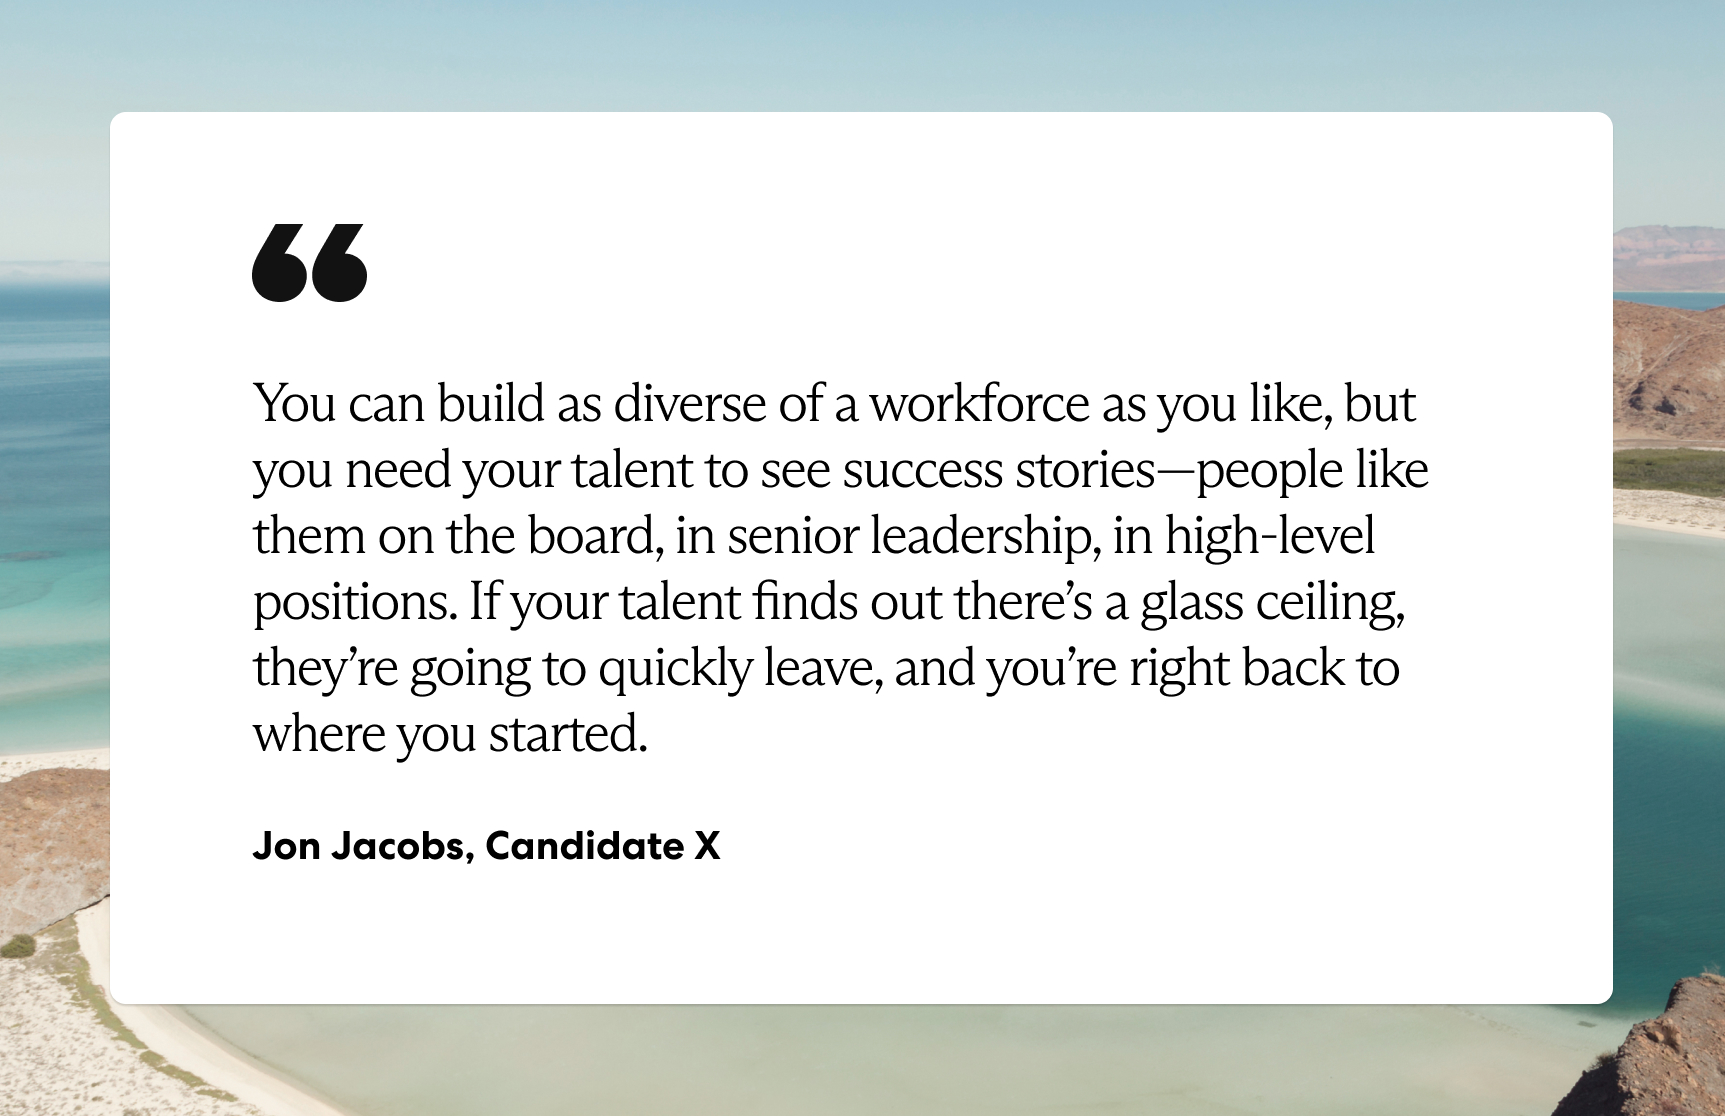 “You can build as diverse of a workforce as you like, but you need your talent to see success stories—people like them on the board, in senior leadership, in high-level positions. If your talent finds out there’s a glass ceiling, they’re going to quickly leave, and you’re right back to where you started.” —Jon Jacobs, Candidate X